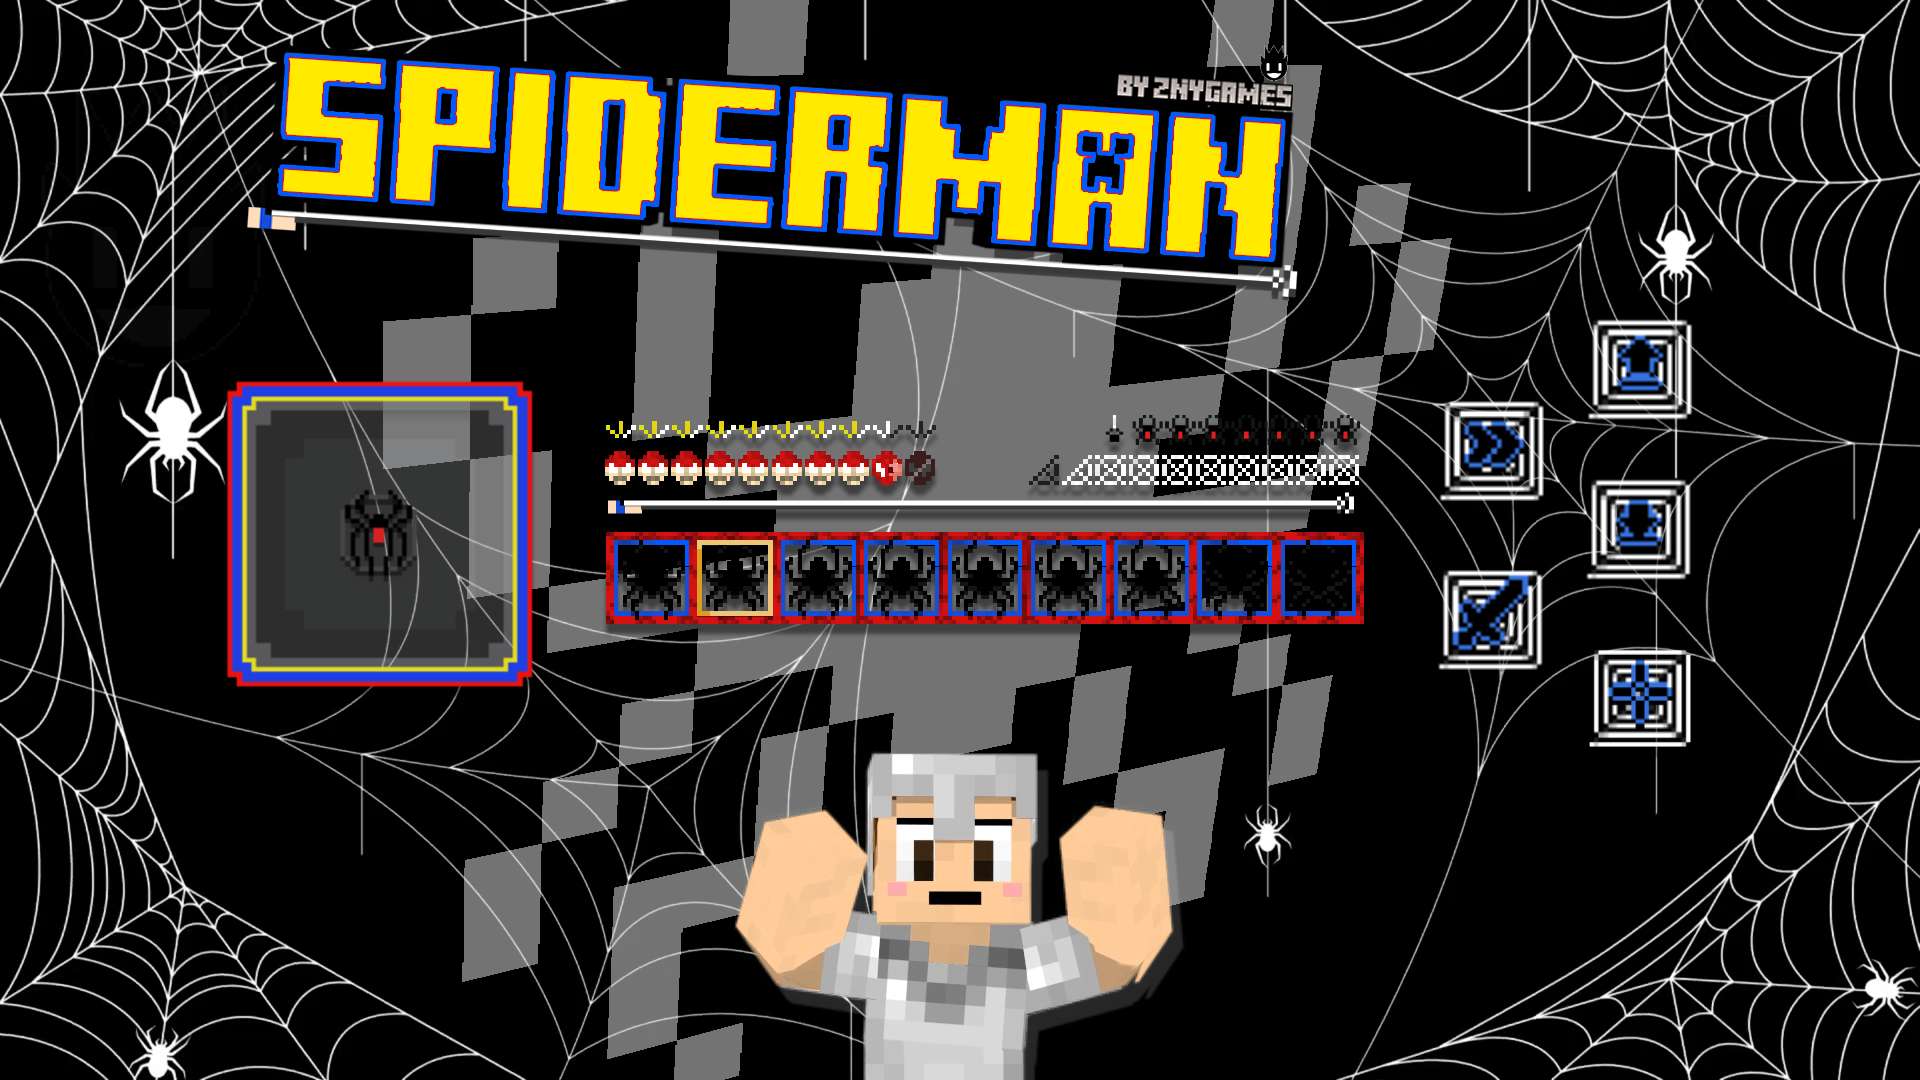 ANIMATED! SPIDERMAN 16x by znygames & zny games on PvPRP